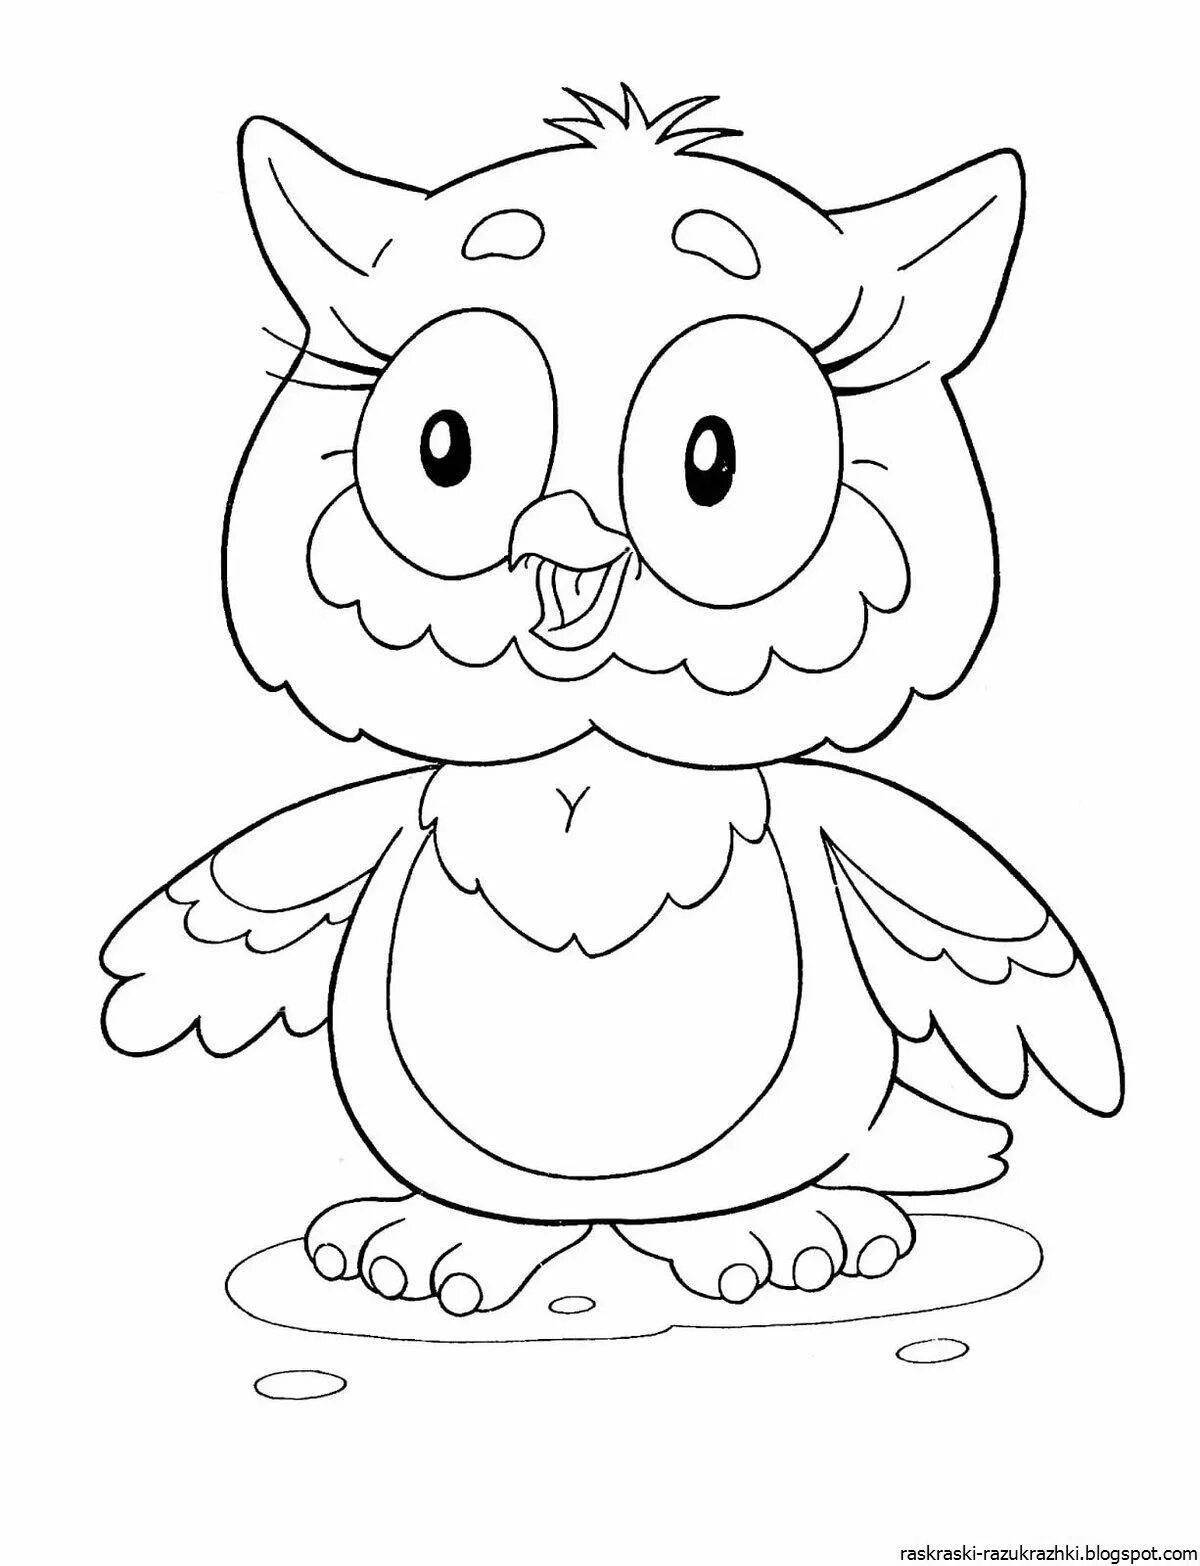 Animated coloring pages for children 7 years old